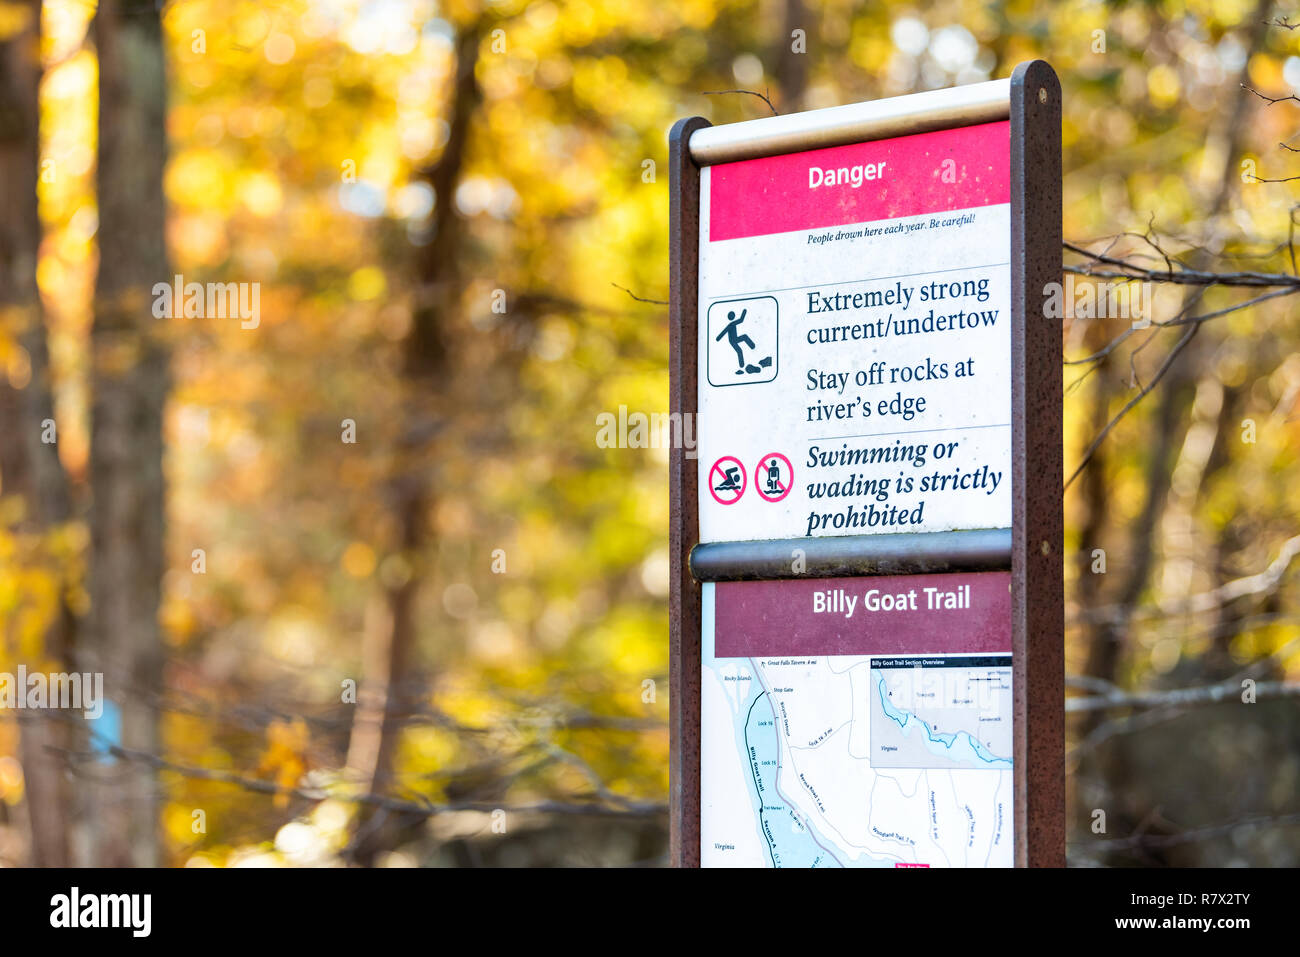 Great Falls, USA - October 31, 2018: Trees during autumn in Maryland, colorful yellow orange leaves foliage and sign directions map for famous Billy G Stock Photo